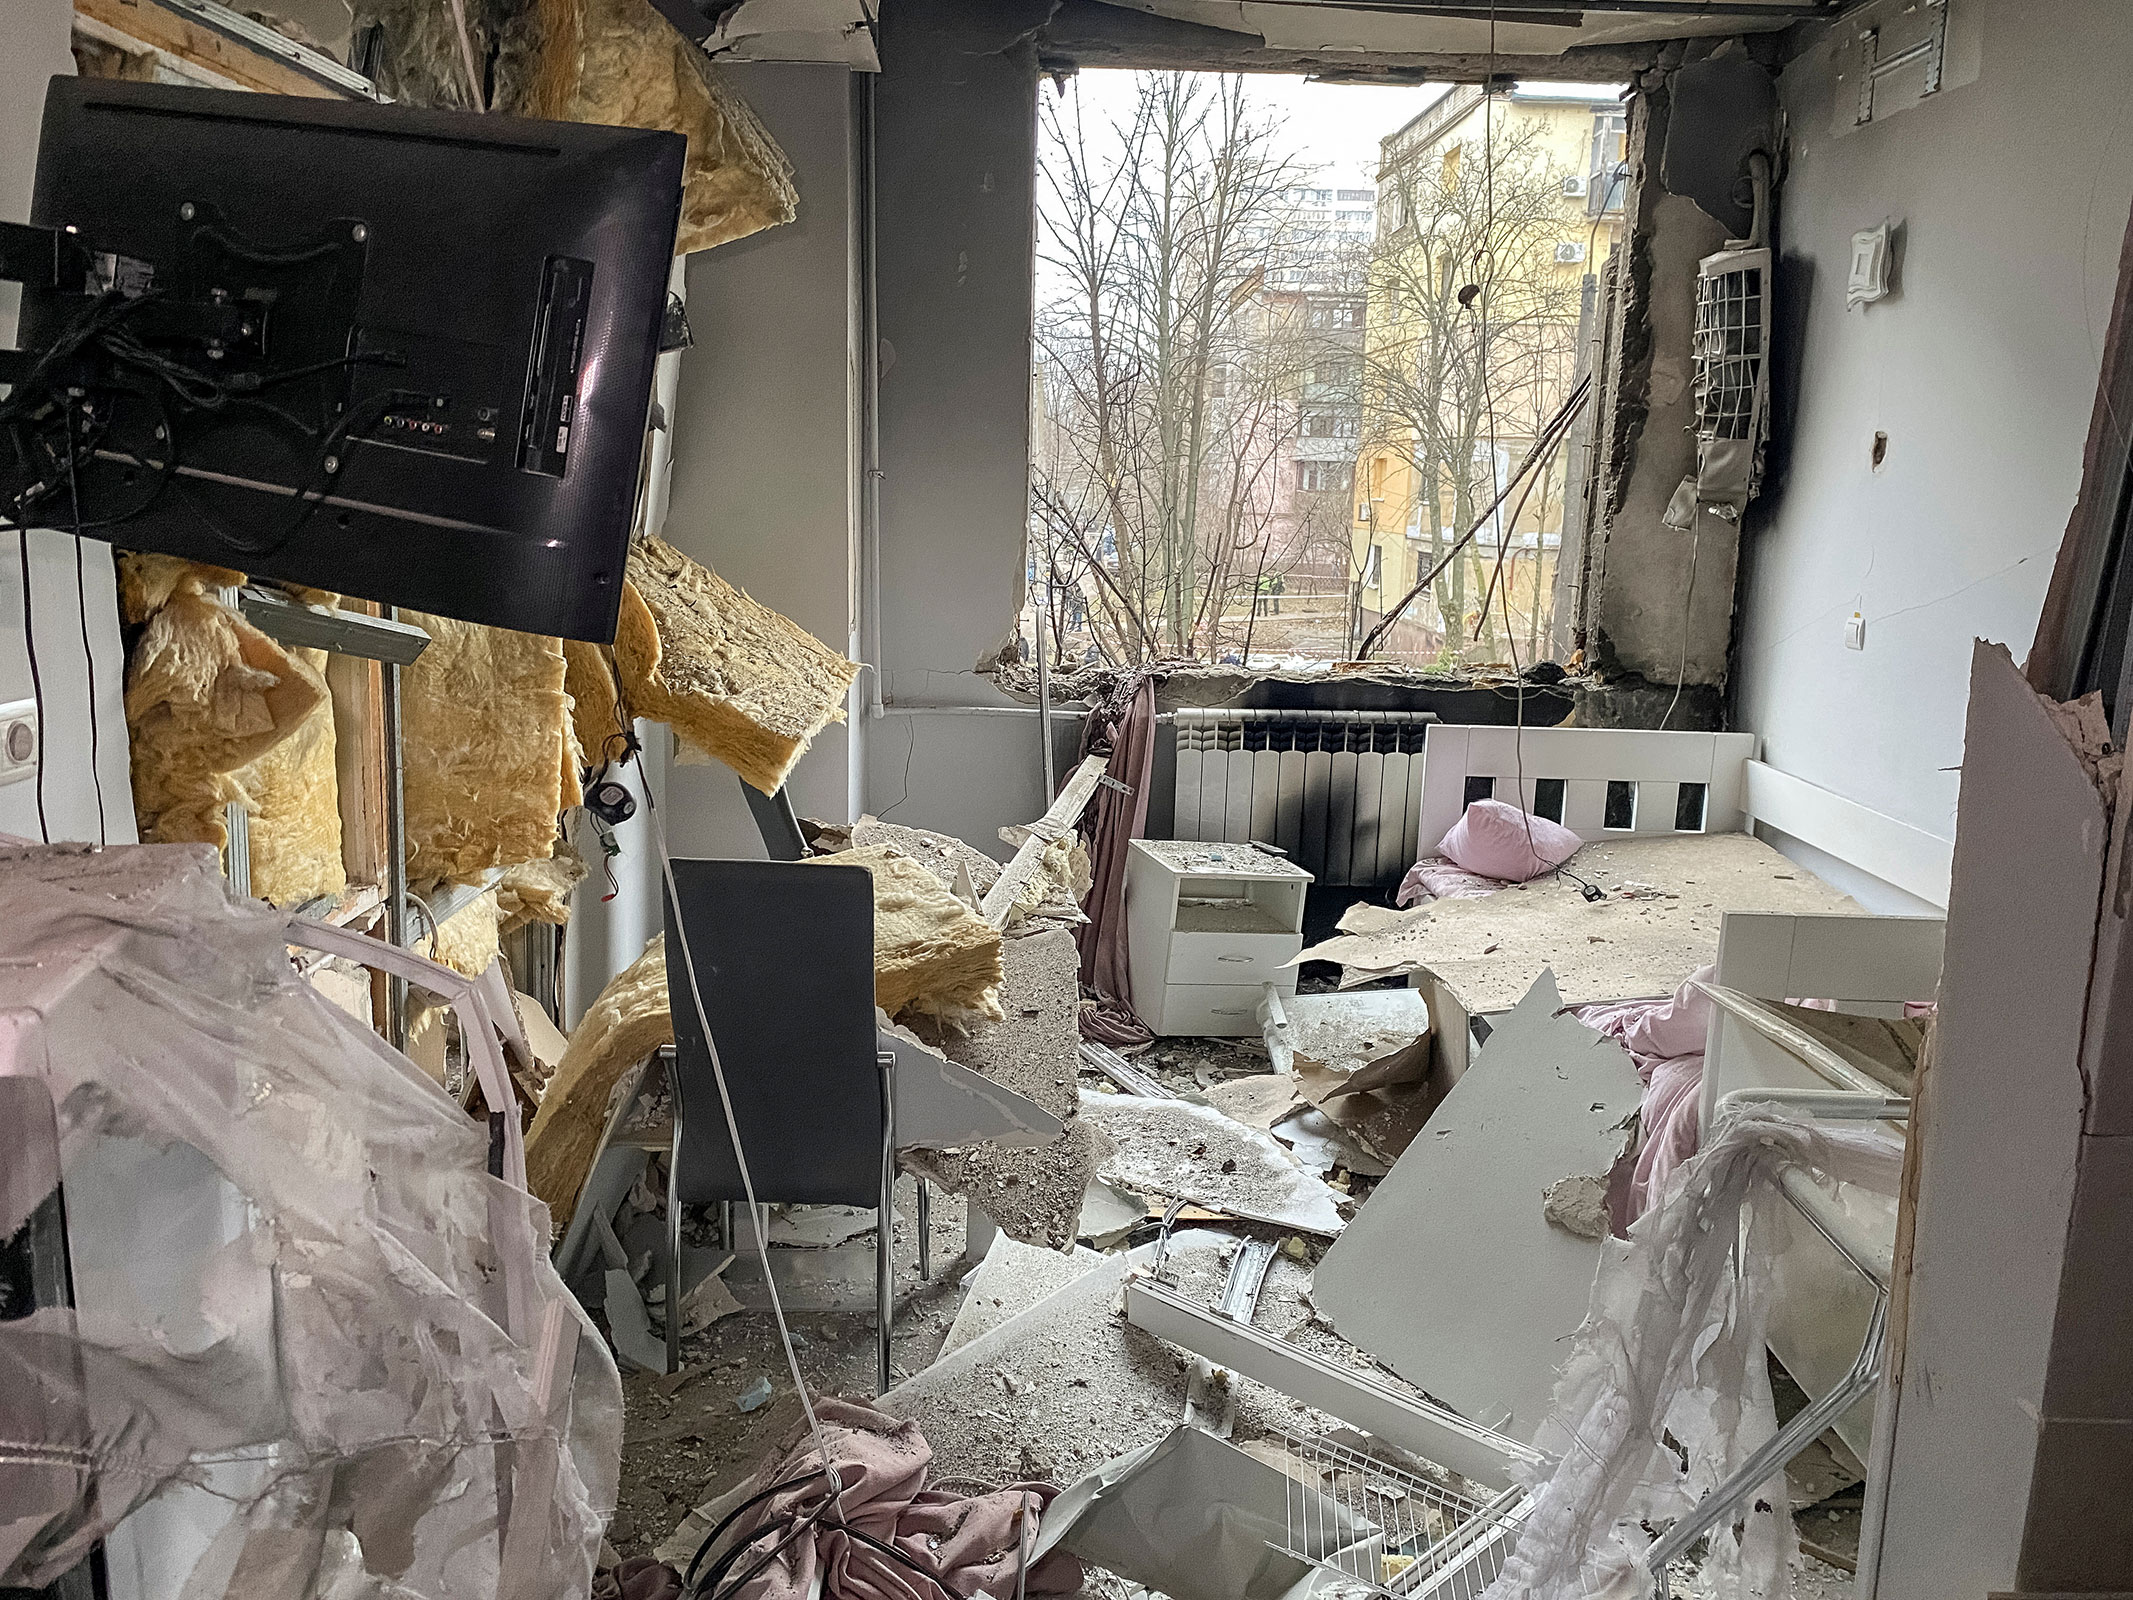 A view shows a maternity hospital ward damaged during a Russian missile strike in Dnipro, Ukraine, on Friday.